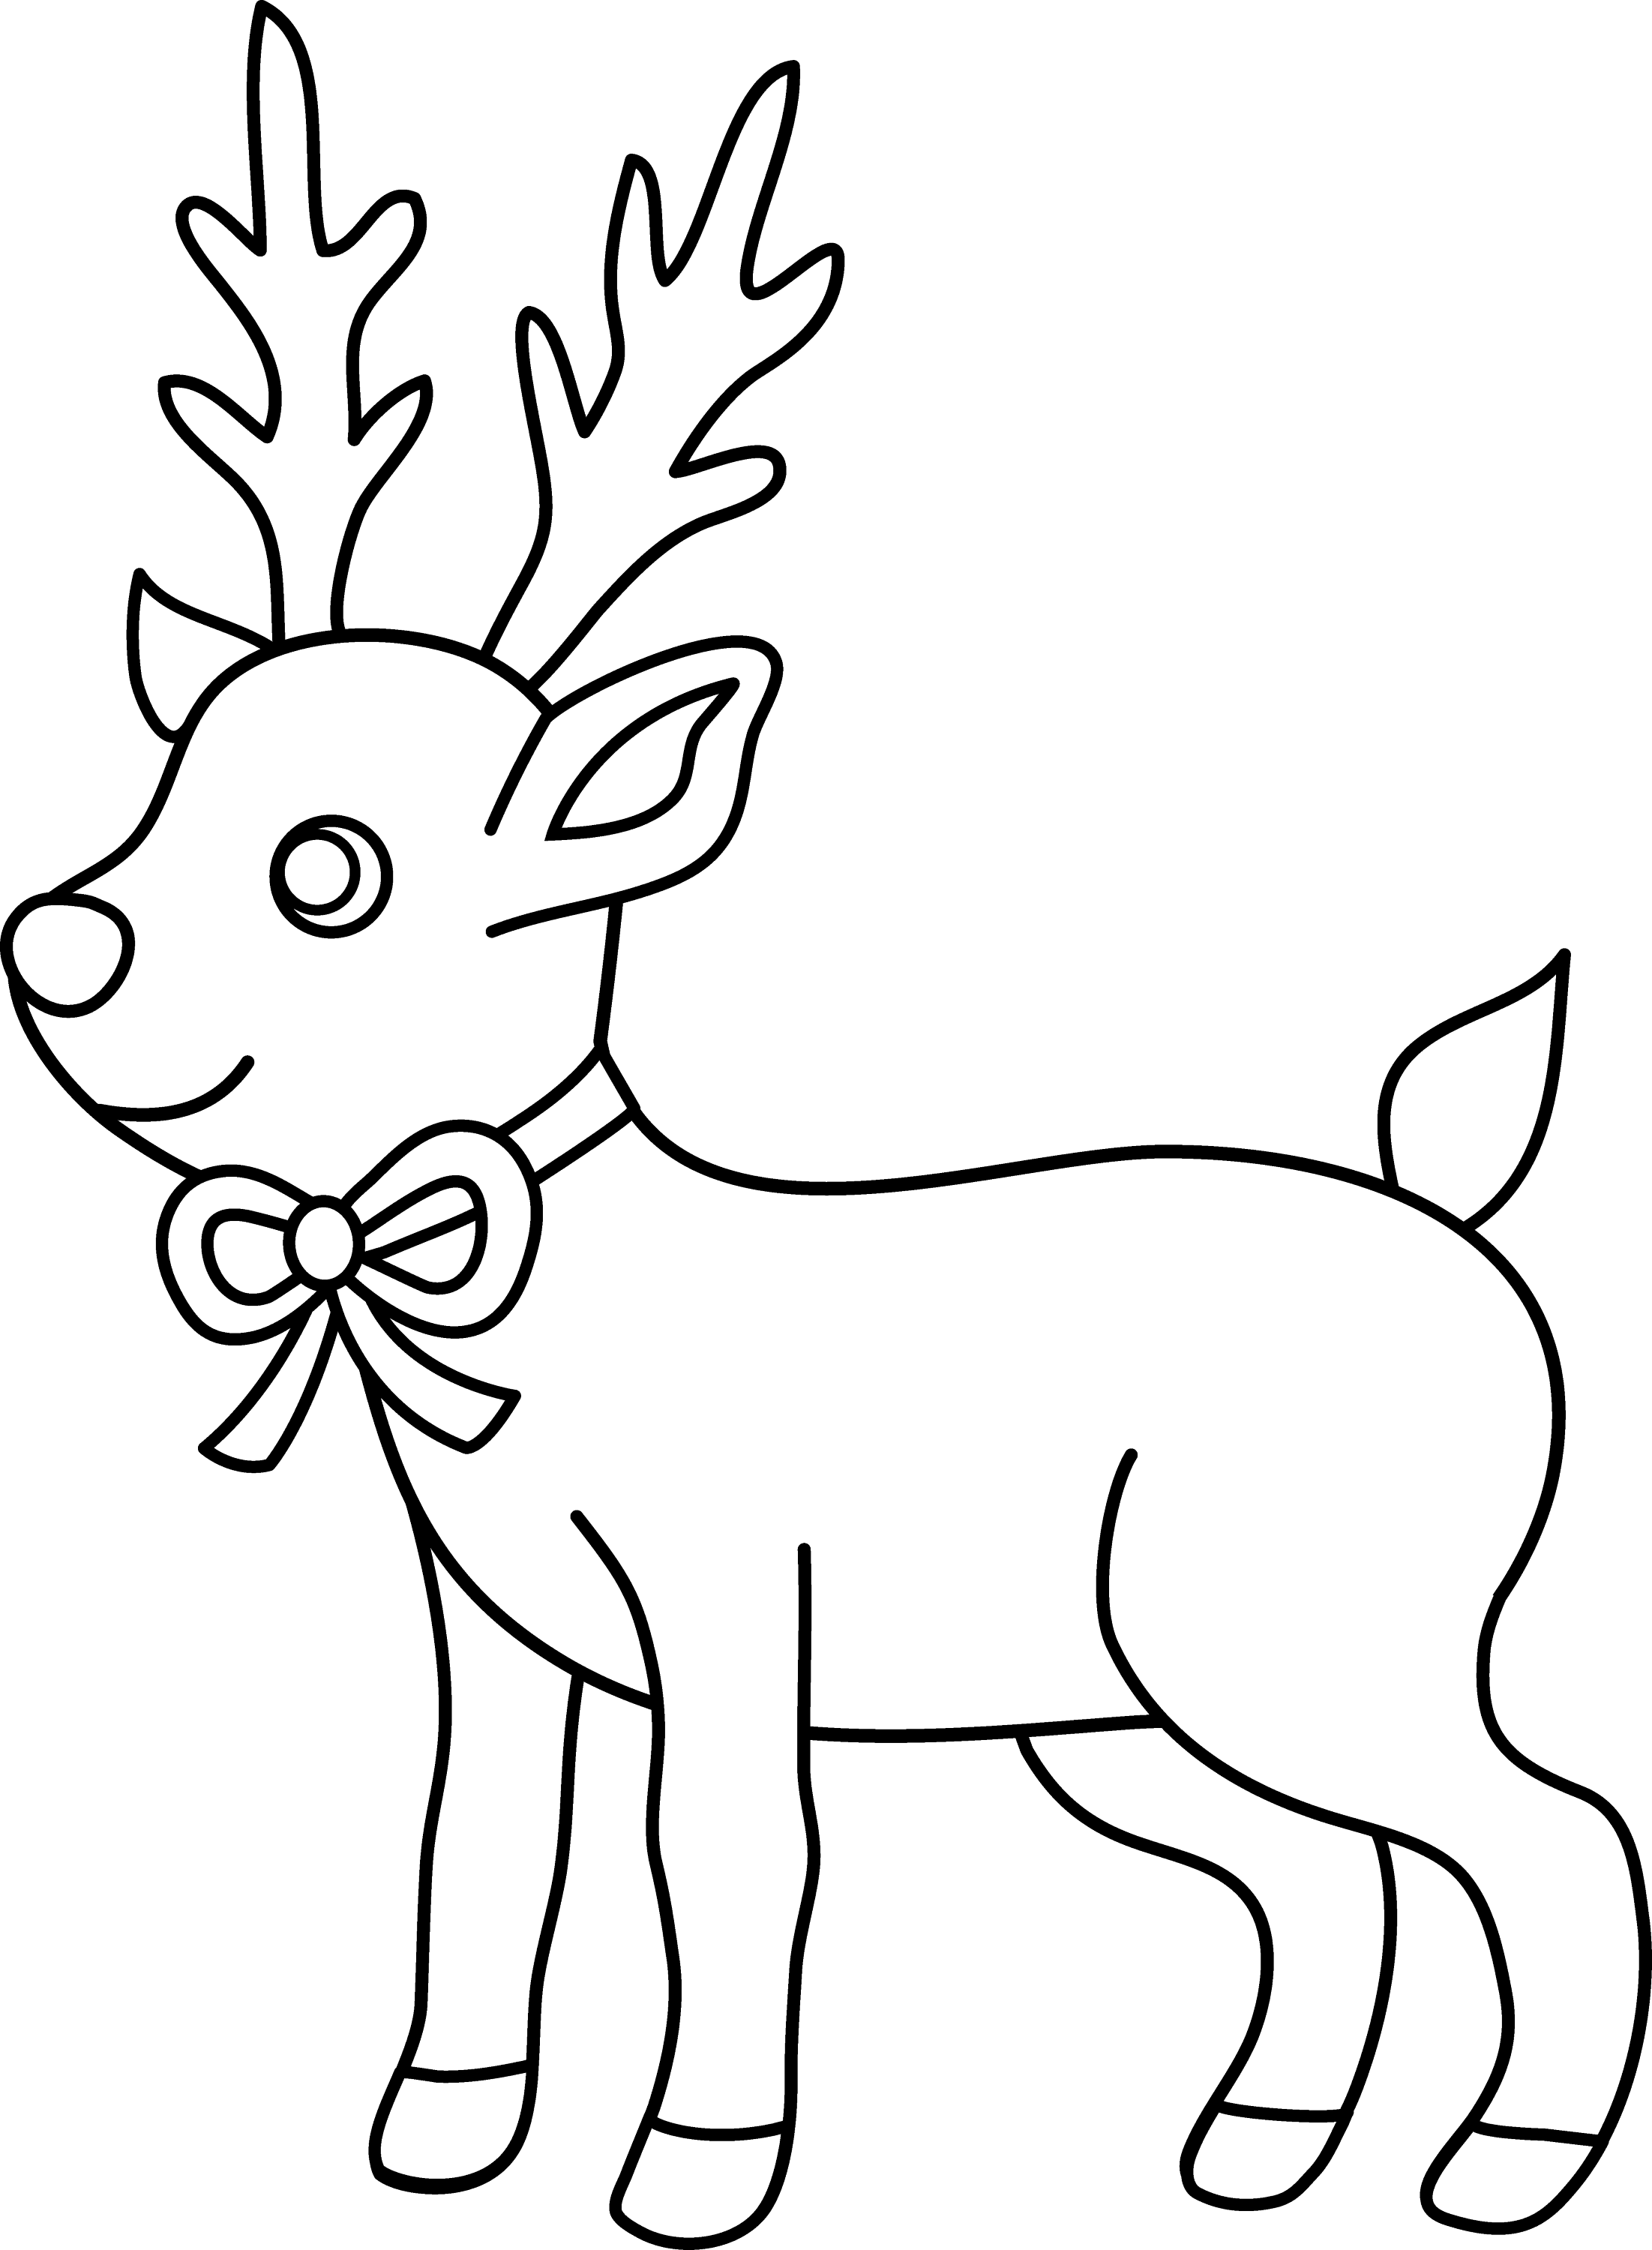 Christmas Reindeer Coloring Page - Free Clip Art